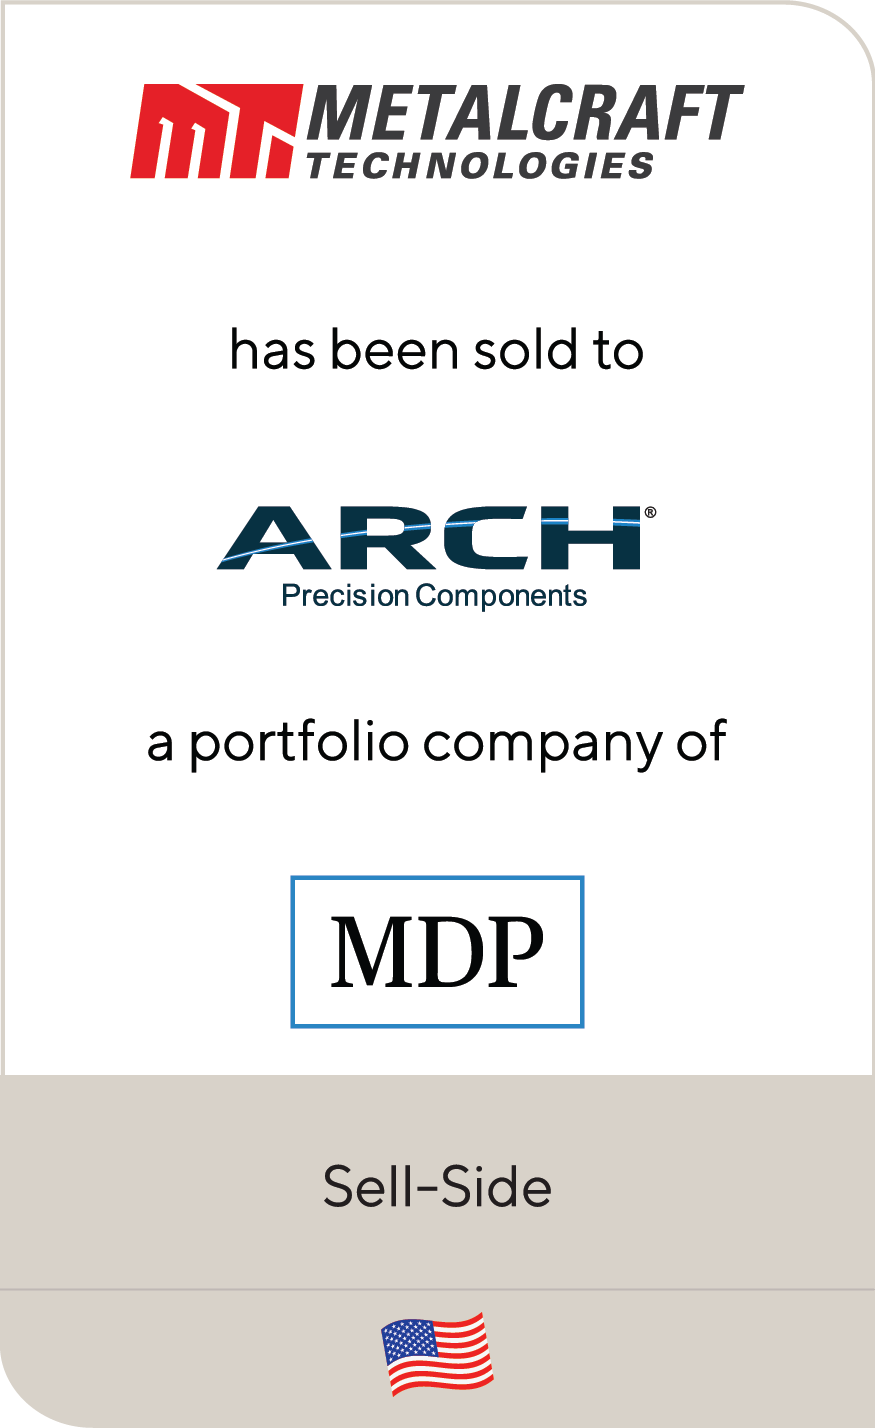 Metalcraft Technologies ARCH Precision Components Madison Dearborn Partners 2021